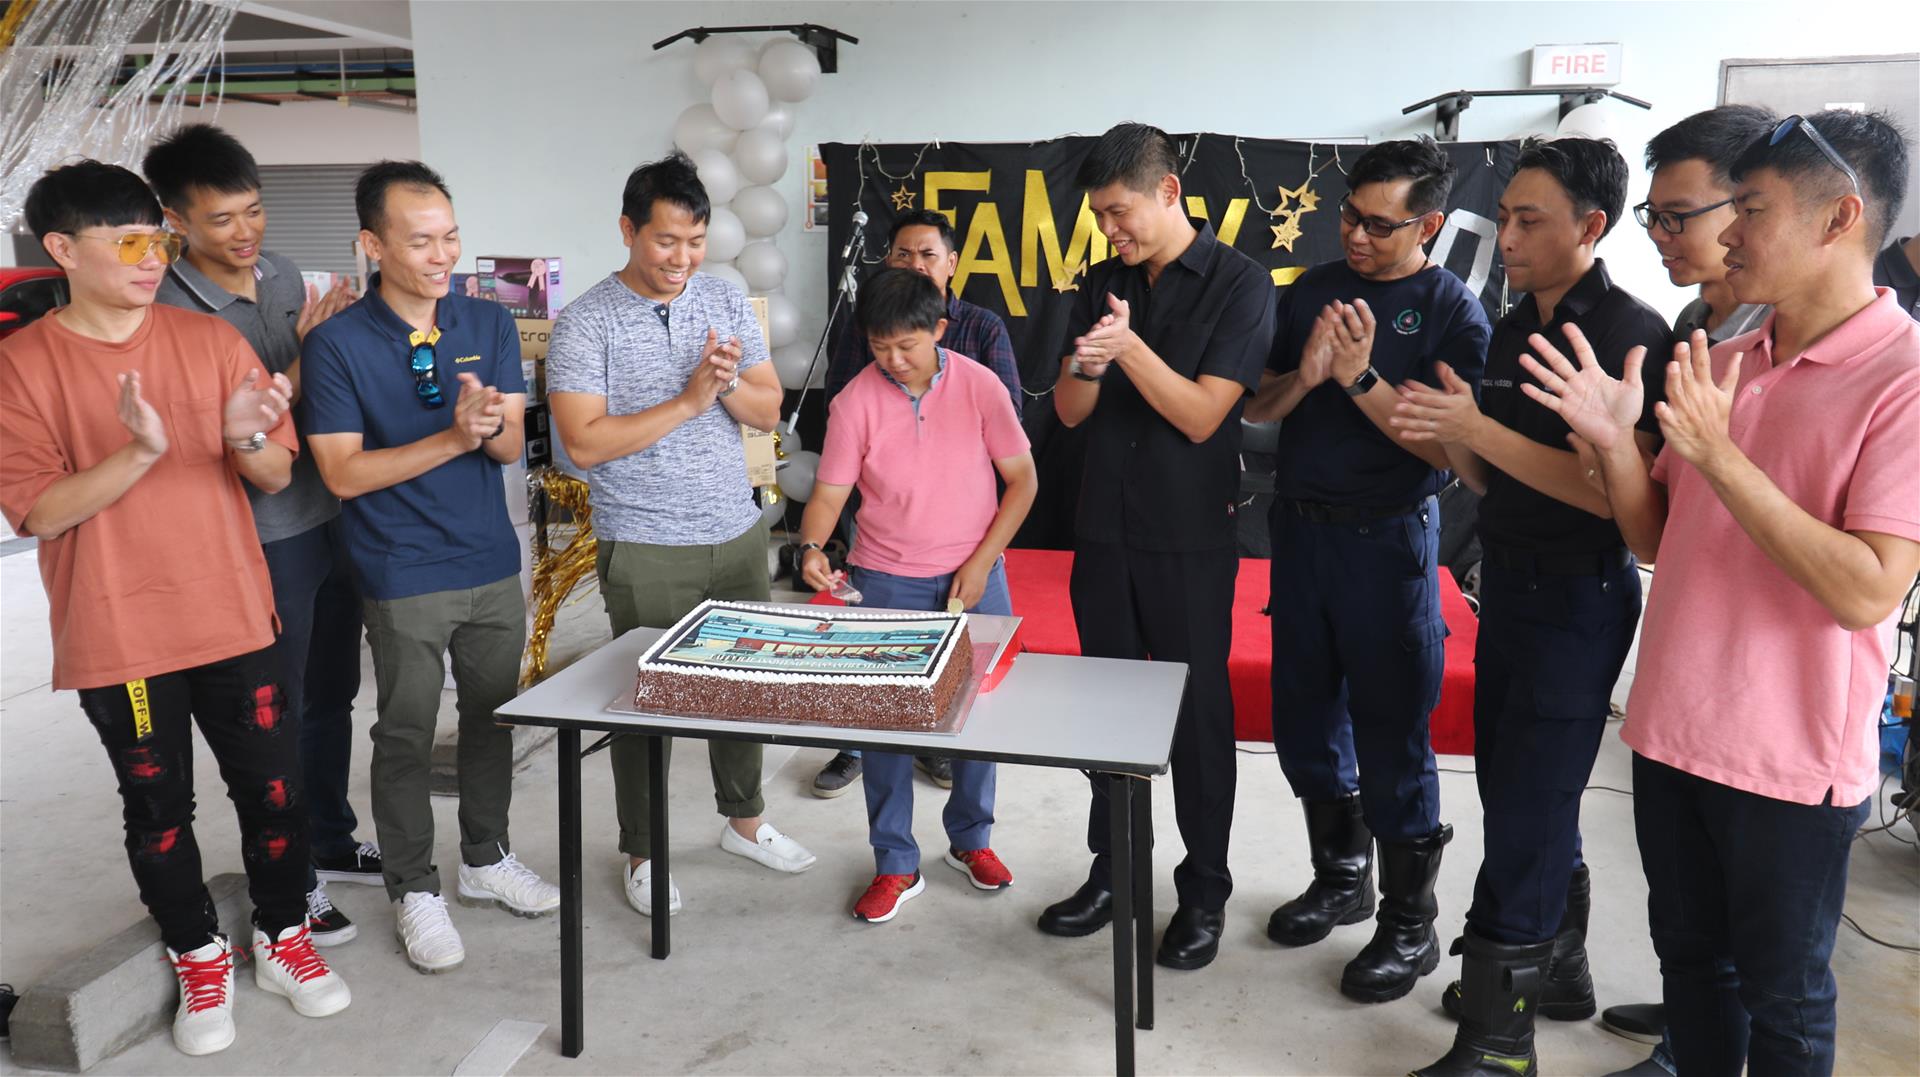 Cake cutting ceremony to commemorate the 10th year anniversary of the station